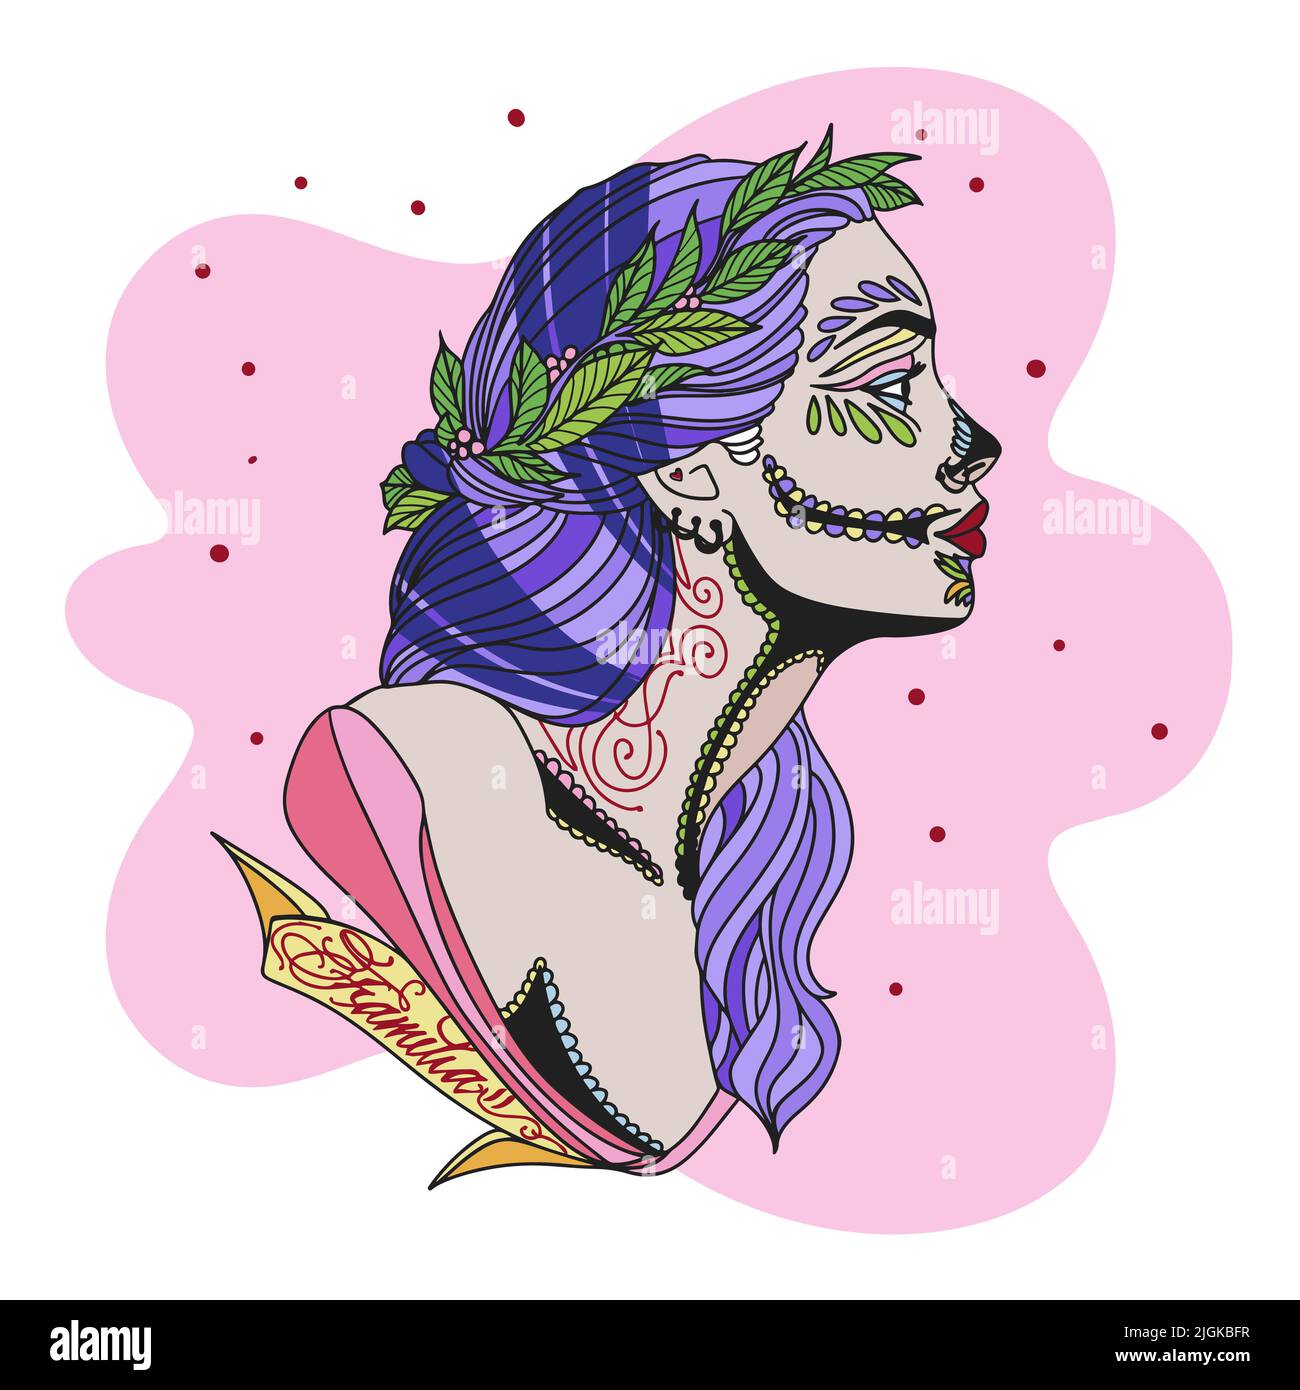 Cute girl in Chicano style, with tattoos and inscriptions, with berries and leaves in her hair, jewelry on her face, piercing, light background Stock Vector